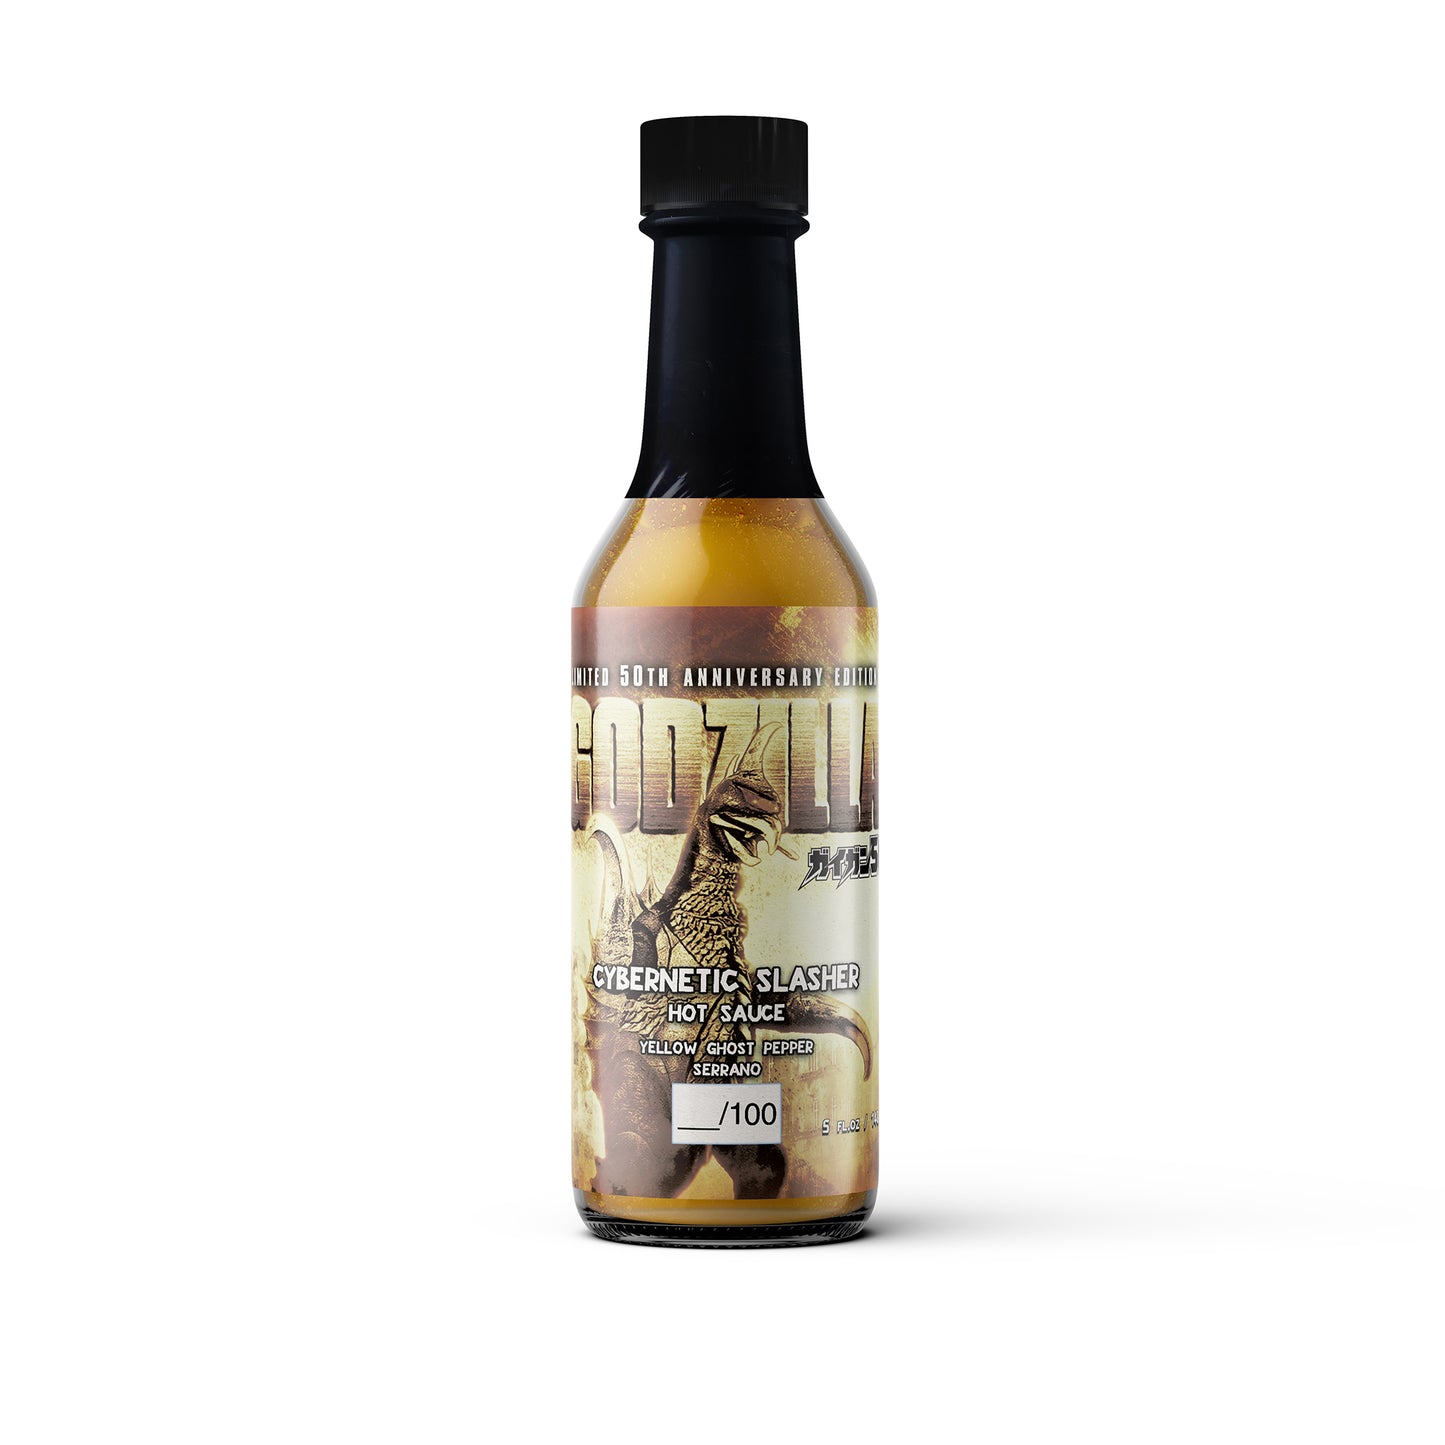 LIMITED EDITION Gigan's Cybernetic Slasher: Yellow Ghost Pepper Serrano Hot Sauce